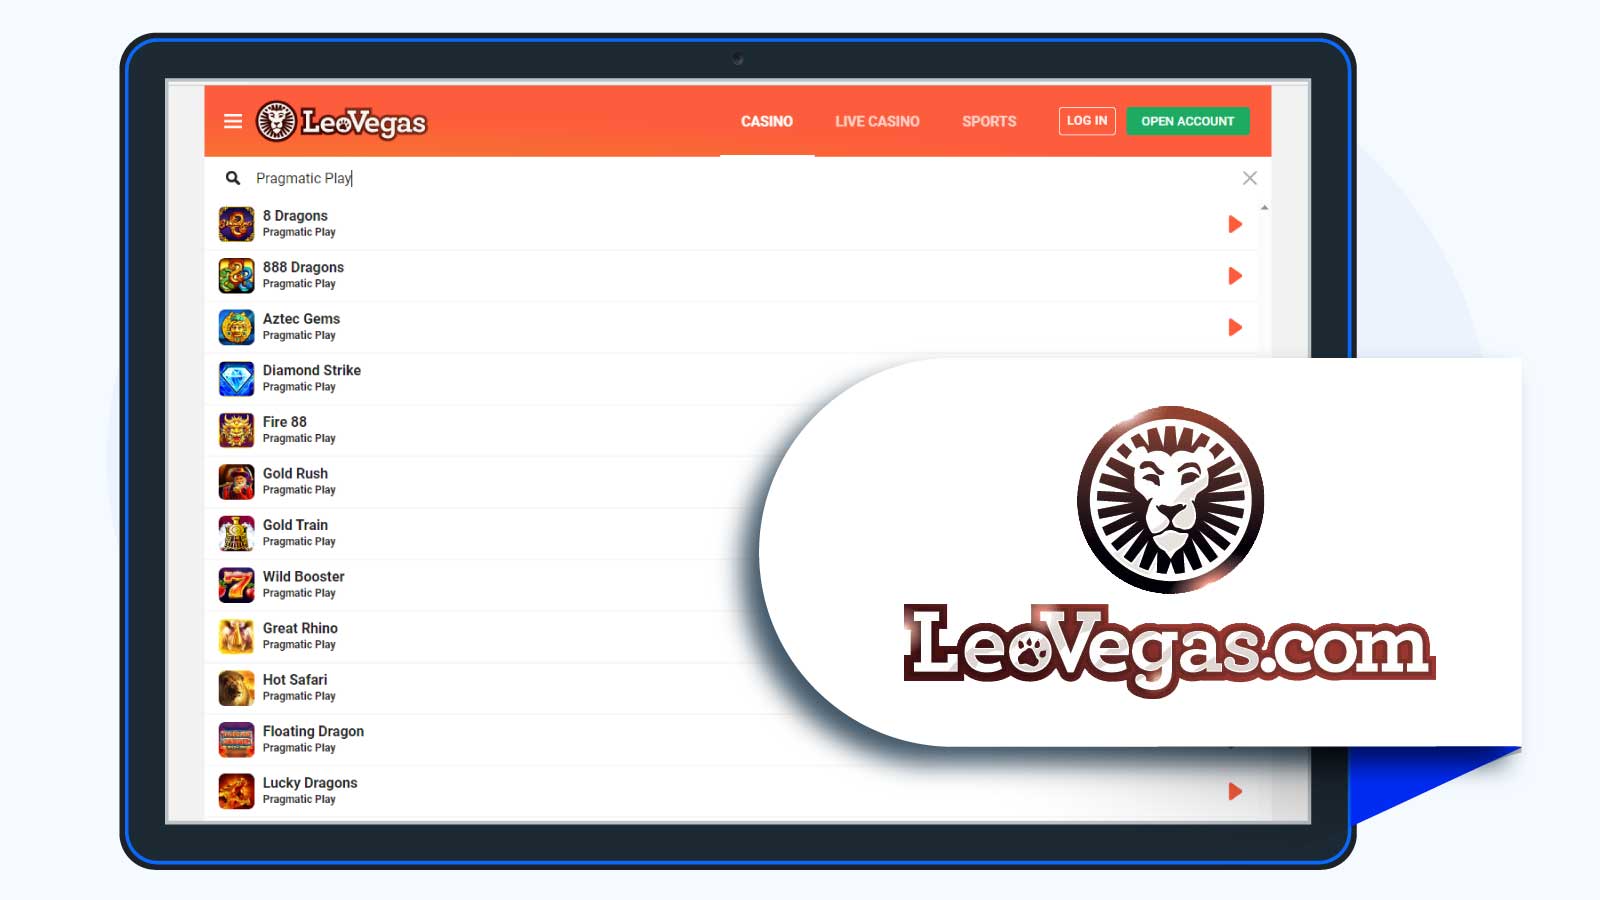 LeoVegas Casino – Casino with the Latest & Exclusive Games from Pragmatic Play